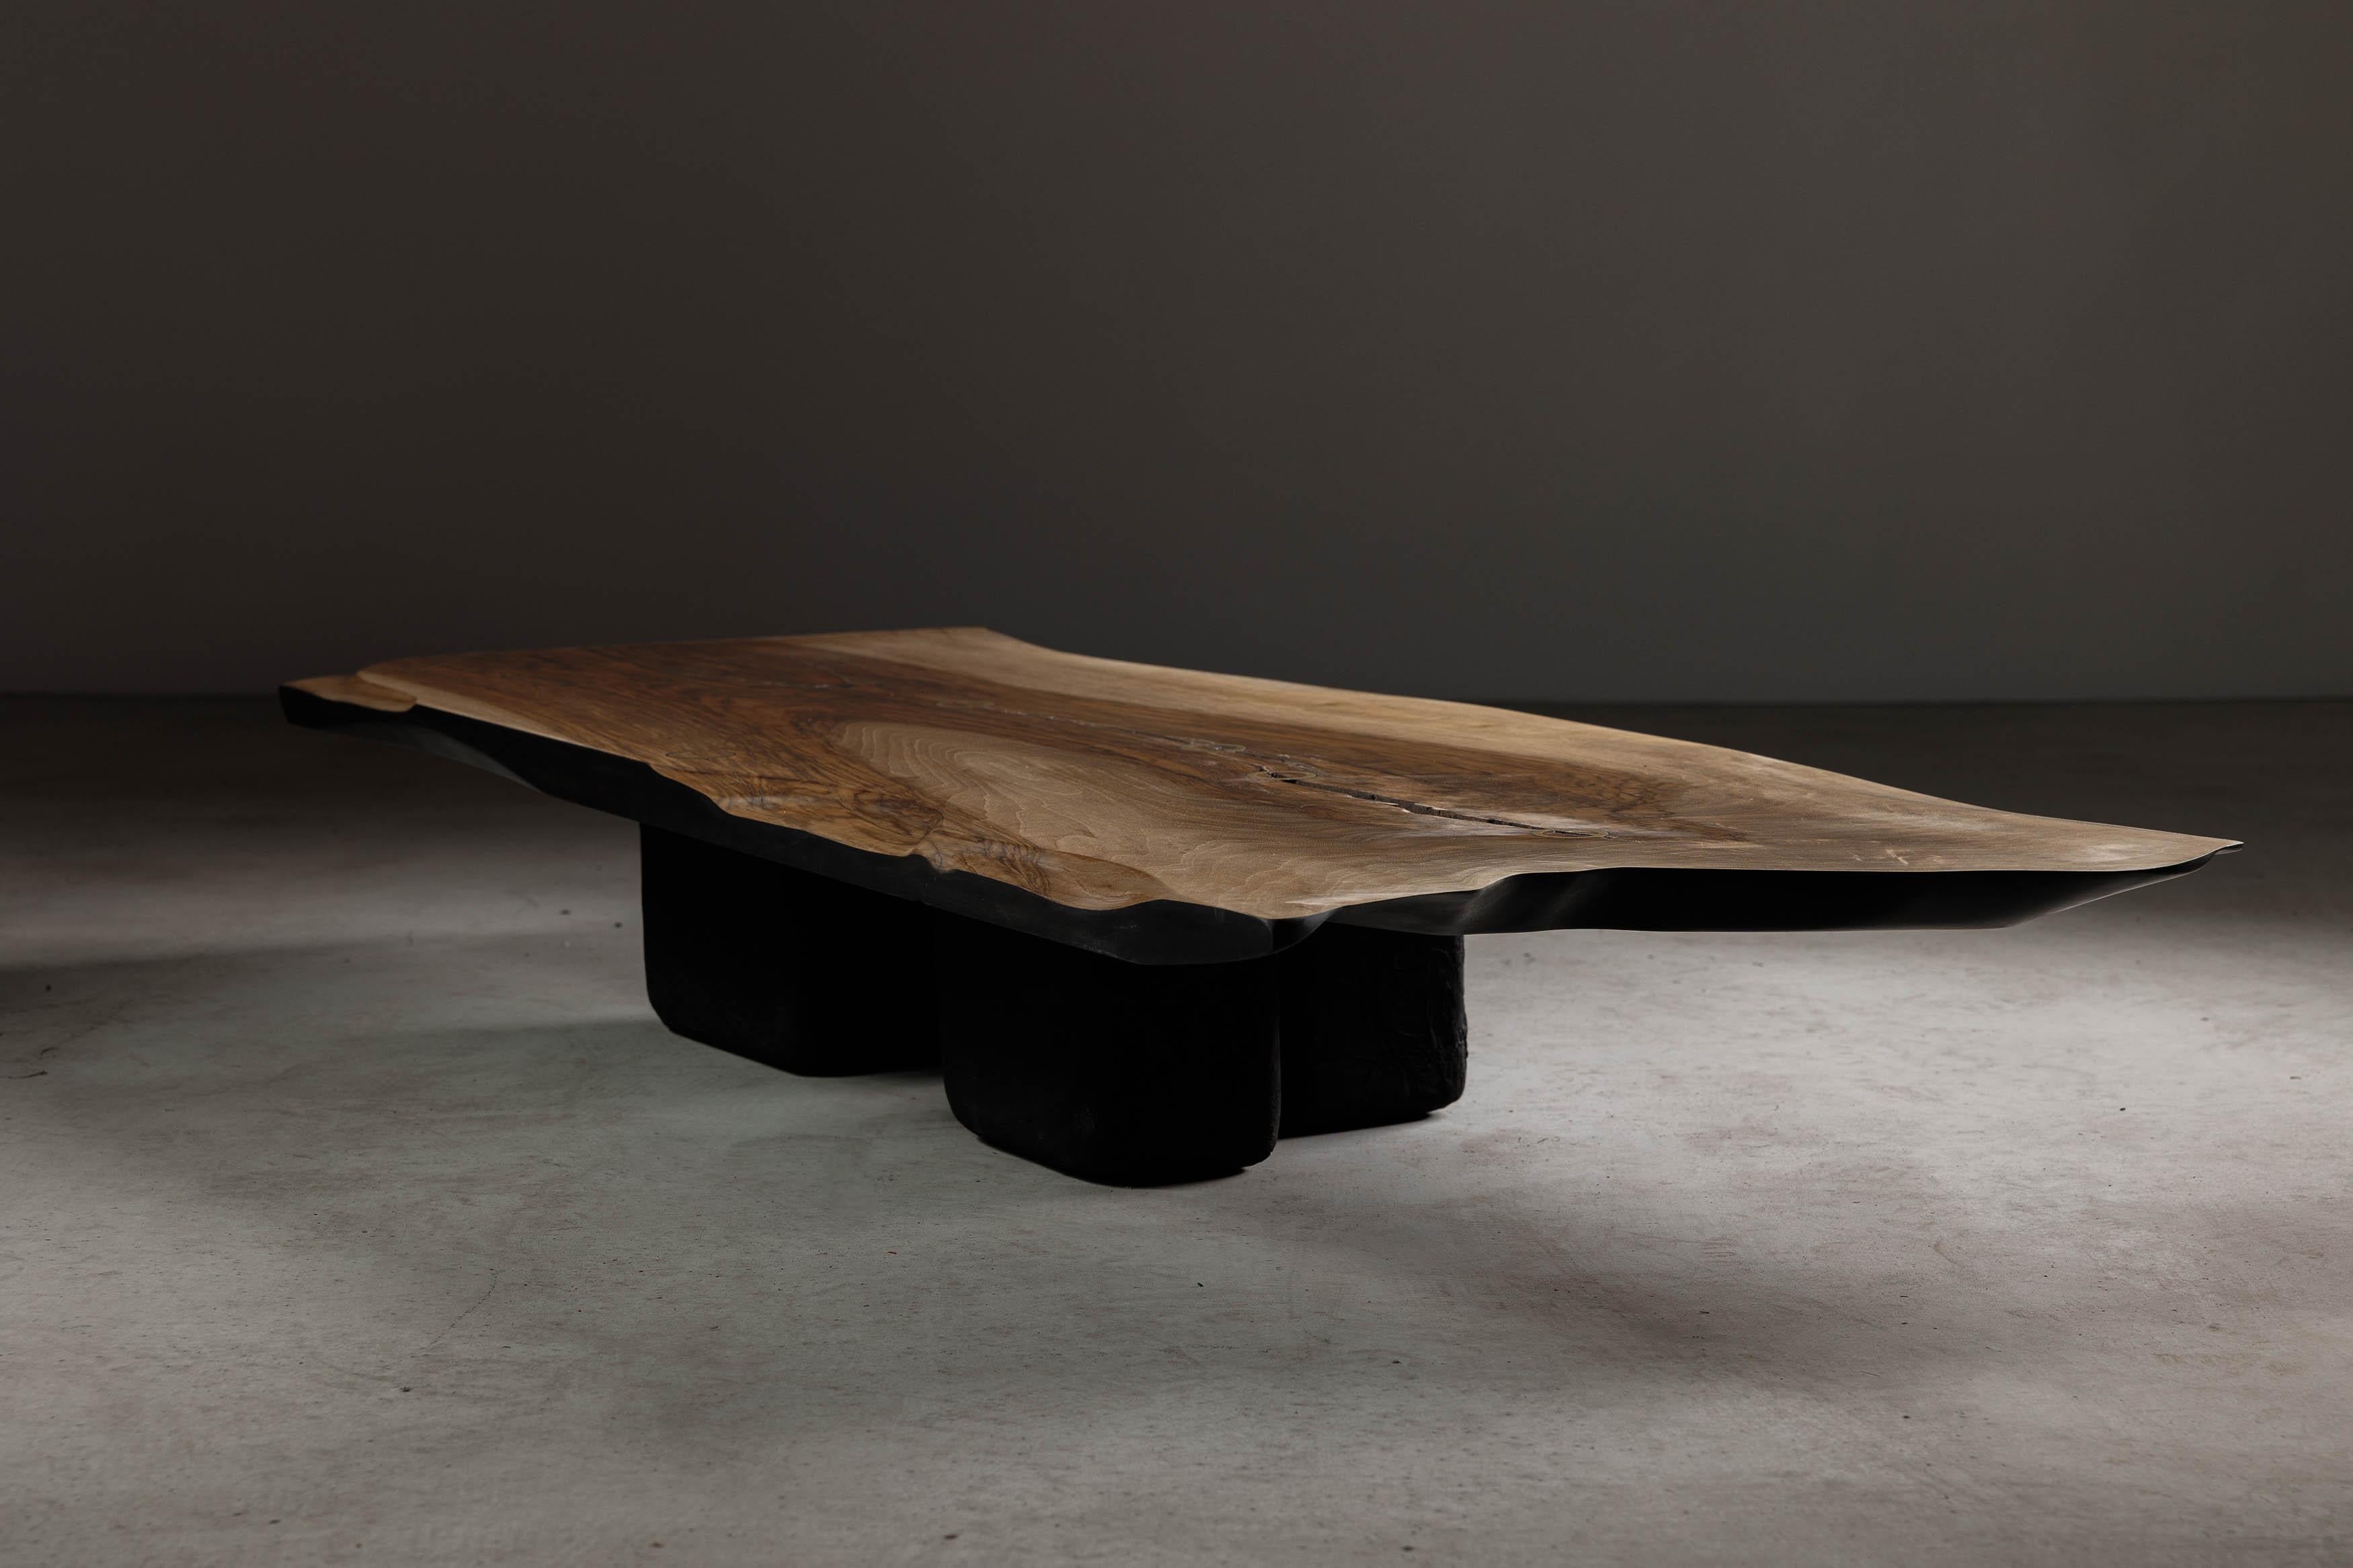 EM109 coffee table by Eero Moss
One of a kind
Dimensions; W 149 x D 60 x H 22 cm
Materials: Walnut, charred ash, India ink.
Finish: Natural oils.

18 Brut Collection

The latest collection by the artist is a tribute to the brutalist